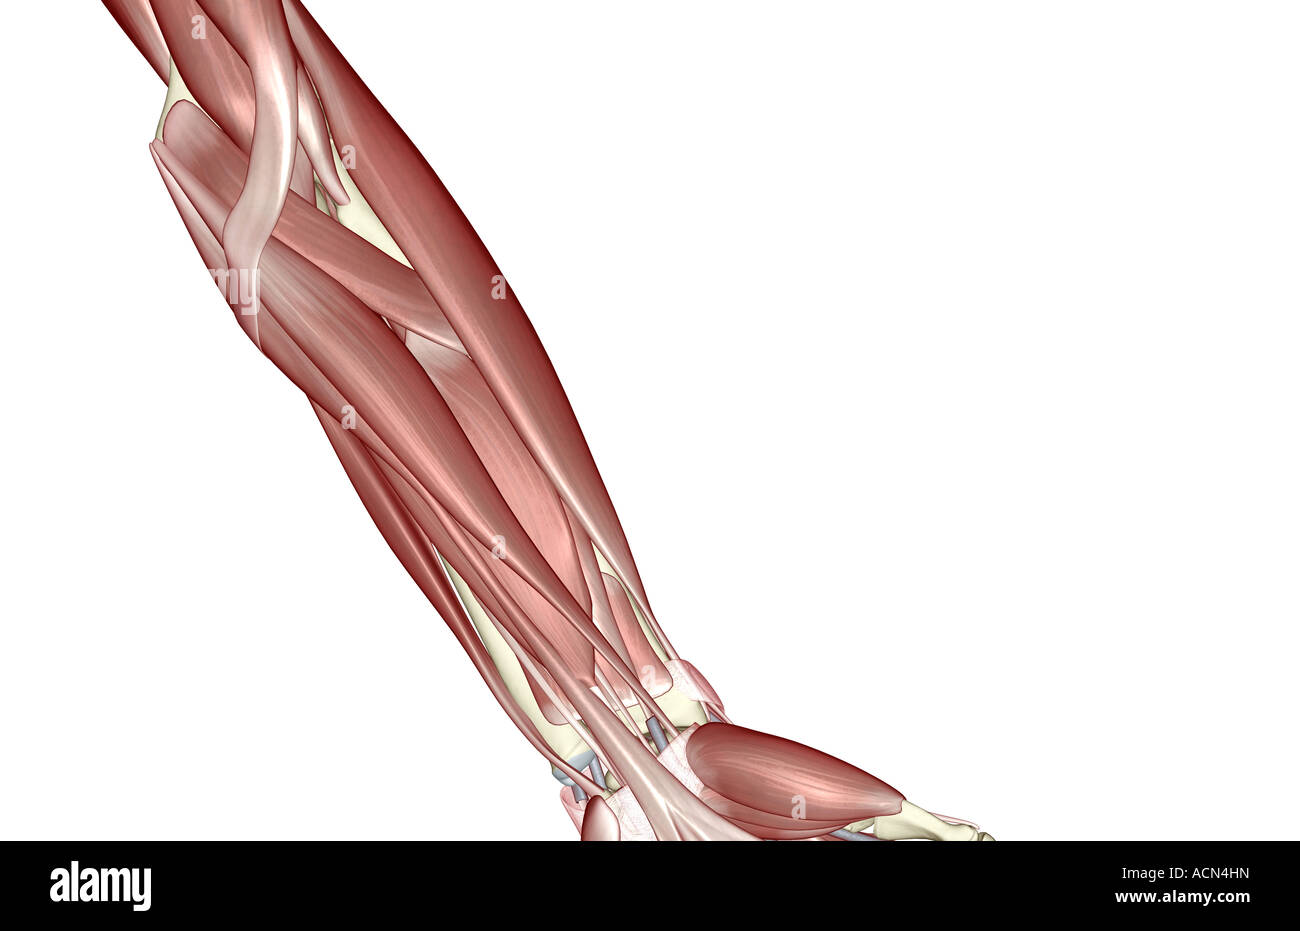 The muscles of the forearm Stock Photo